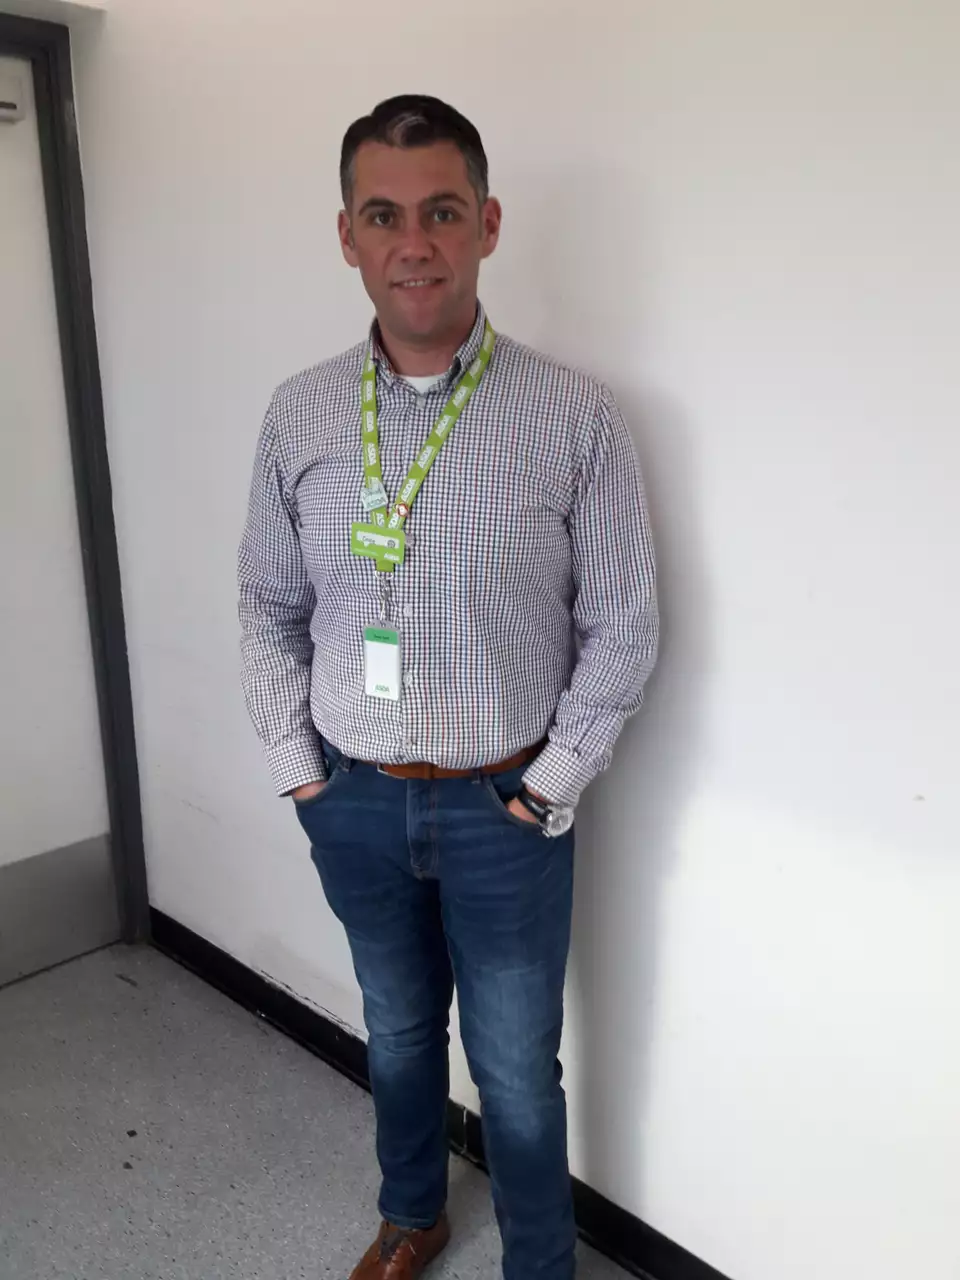 Warm welcome for all from Asda Chatham store manager Craig | Asda Chatham